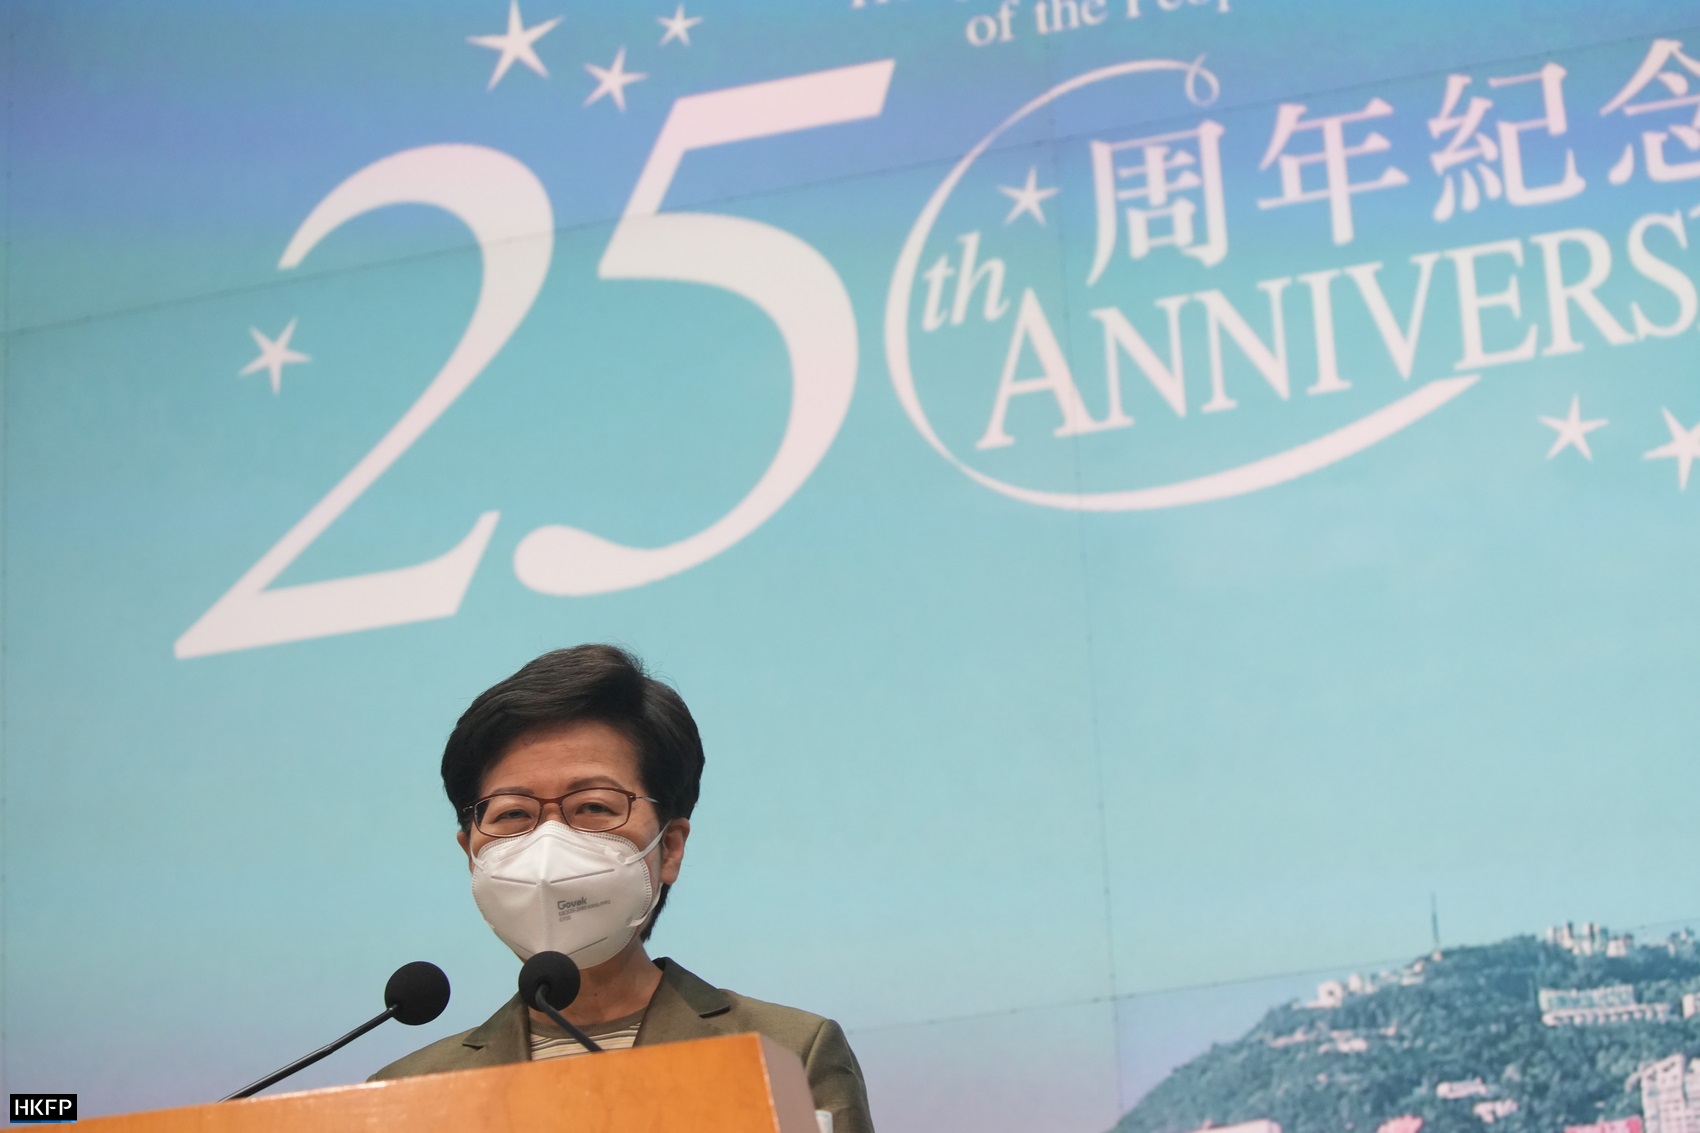 Carrie Lam 25th handover anniversary